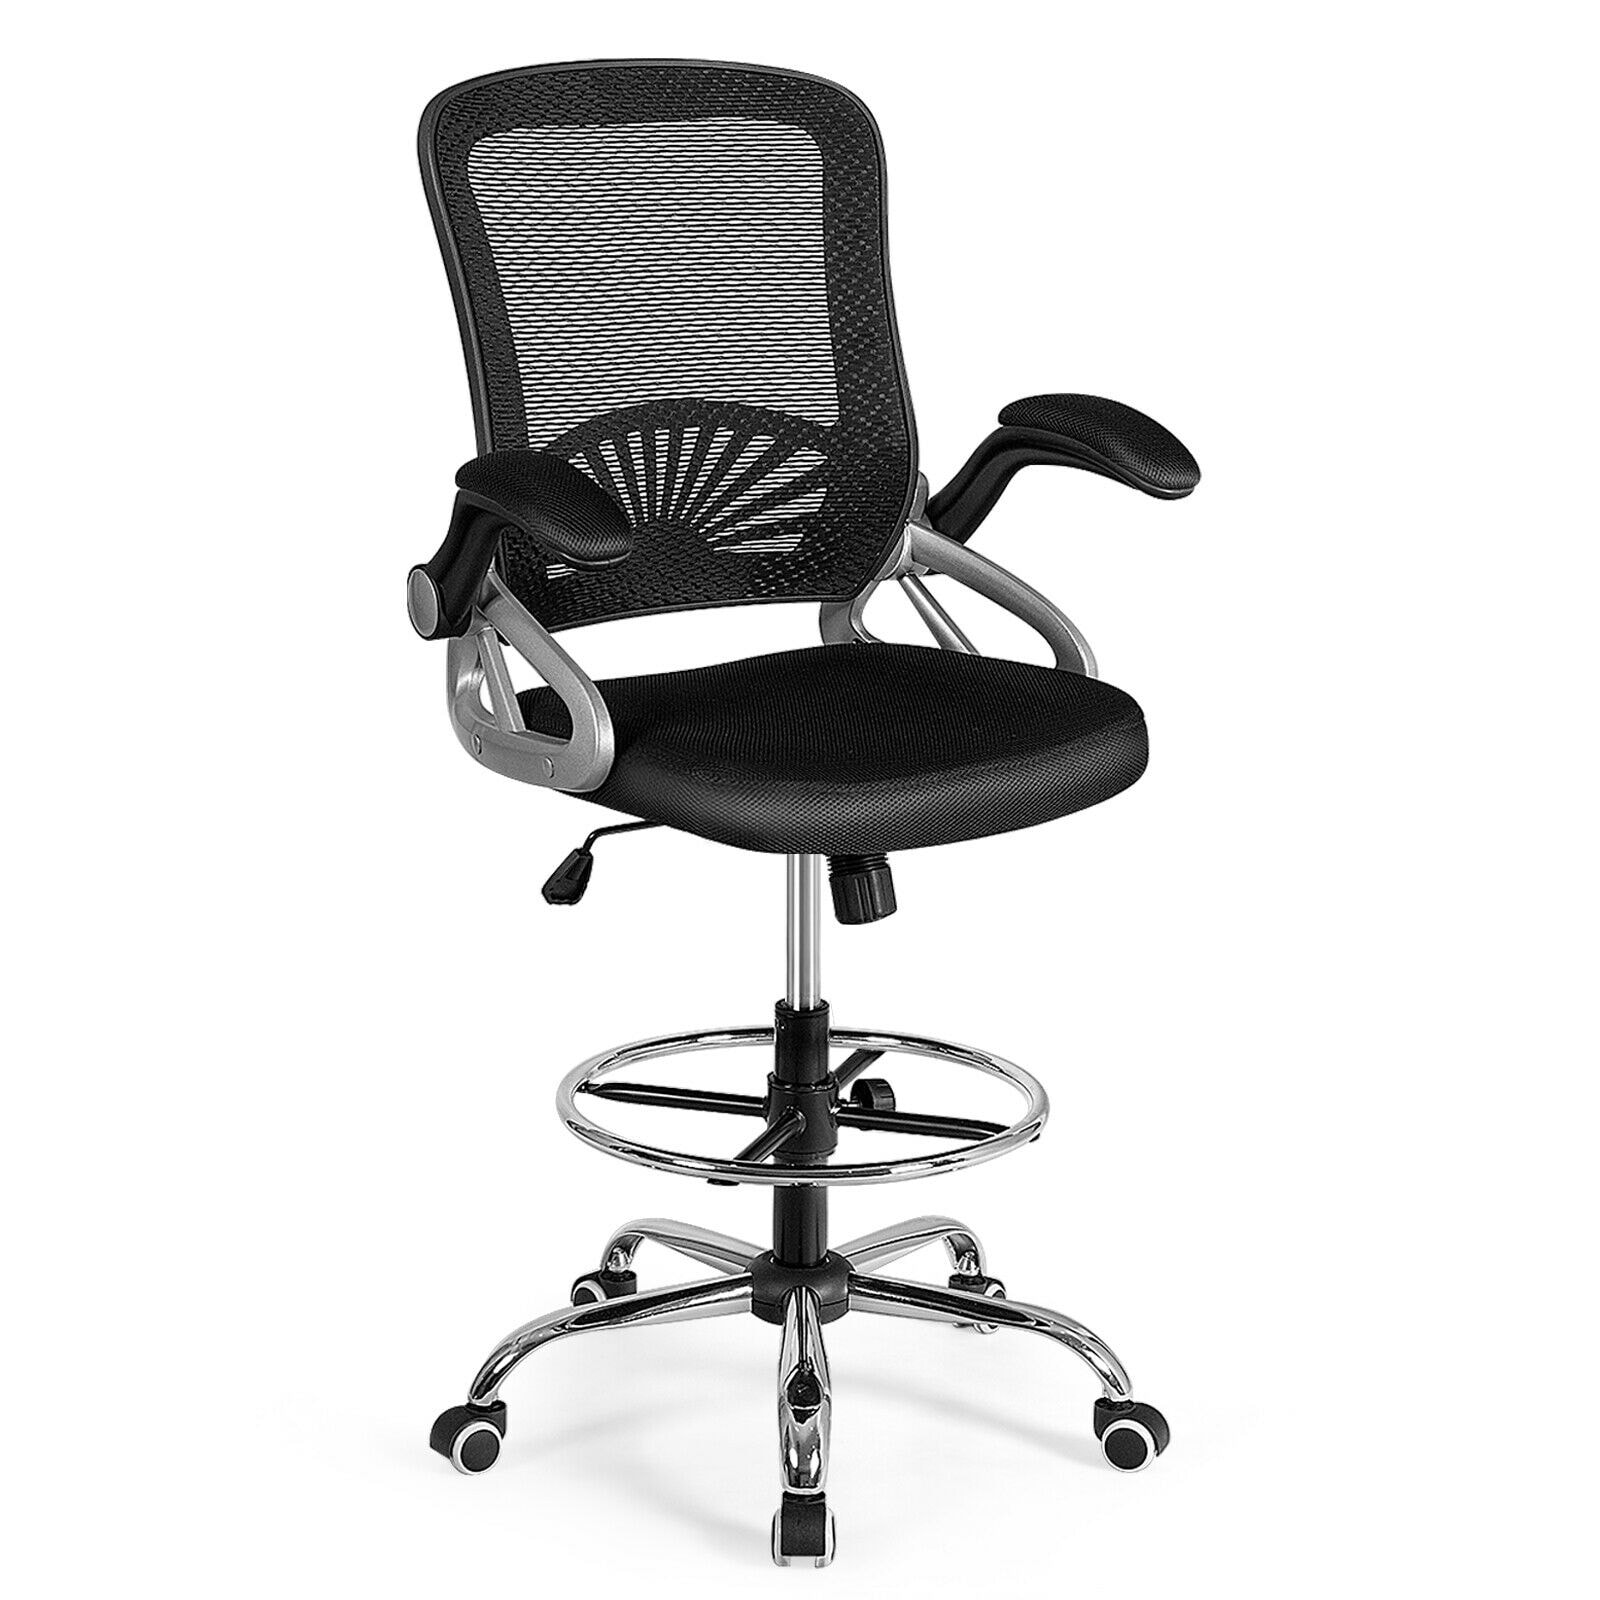 https://ak1.ostkcdn.com/images/products/is/images/direct/003a60a2b914688613cf93f242e7c8fe8ba177b5/Gymax-Mesh-Drafting-Chair-Mid-Back-Office-Chair-Adjustable-Height.jpg